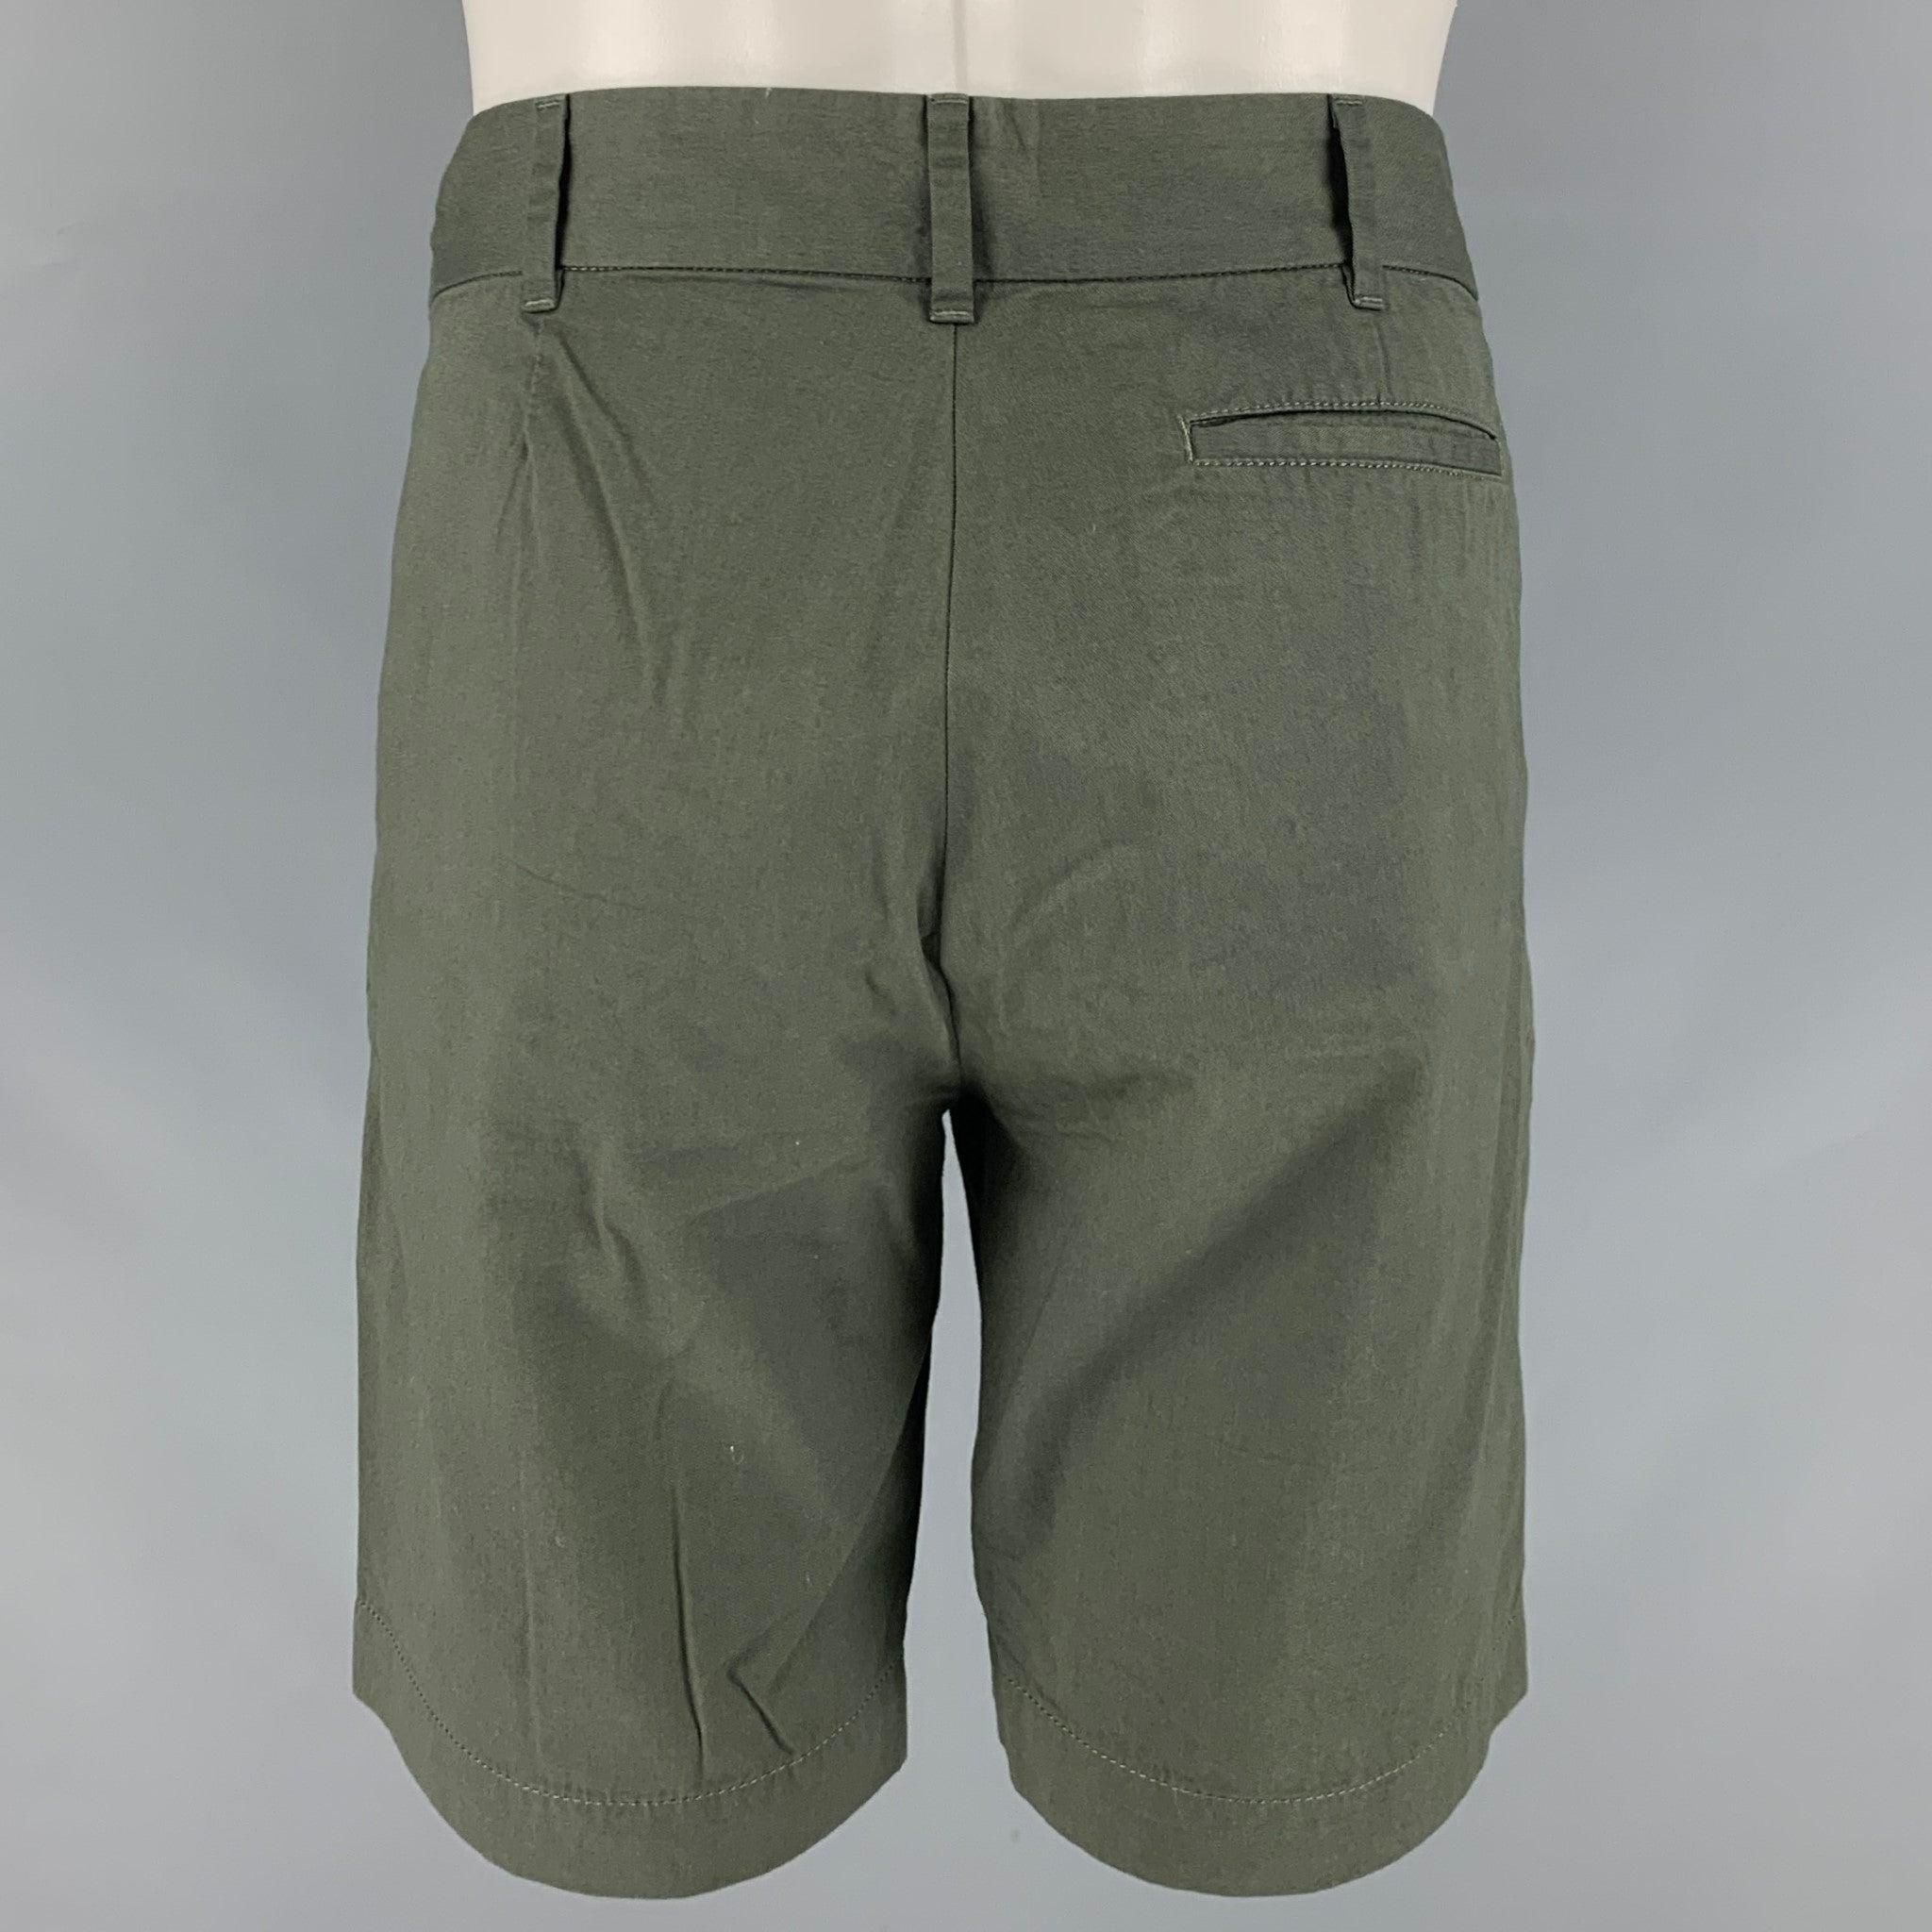 TOMAS MAIER Size 34 Olive Solid Cotton Zip Fly Shorts In Excellent Condition For Sale In San Francisco, CA